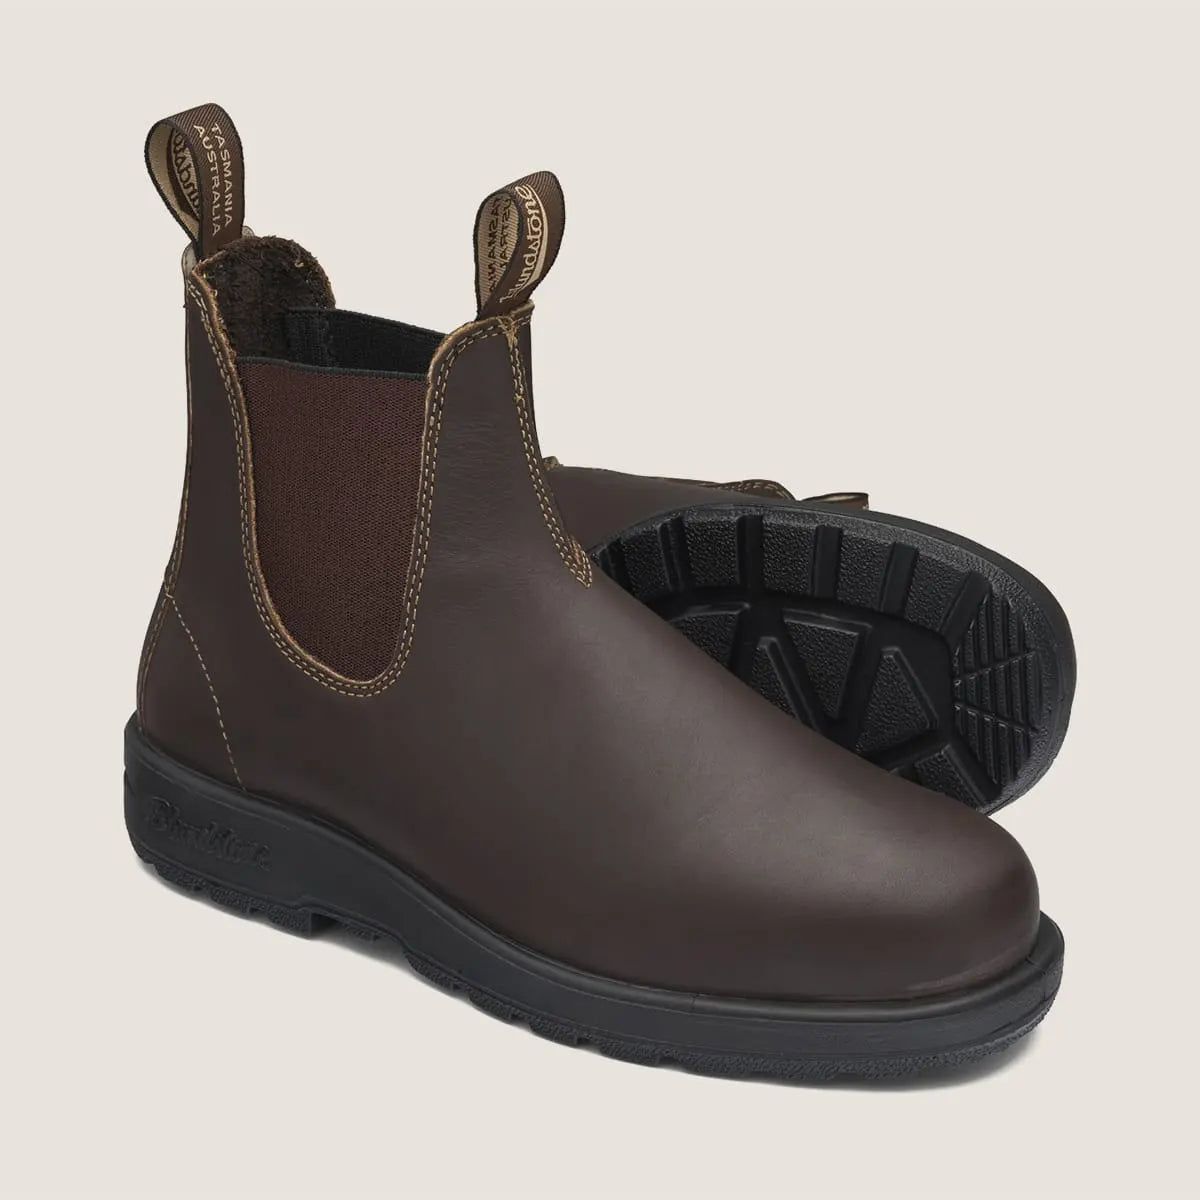 Blundstone 200 Elastic Sided Non Safety Boot-Brown